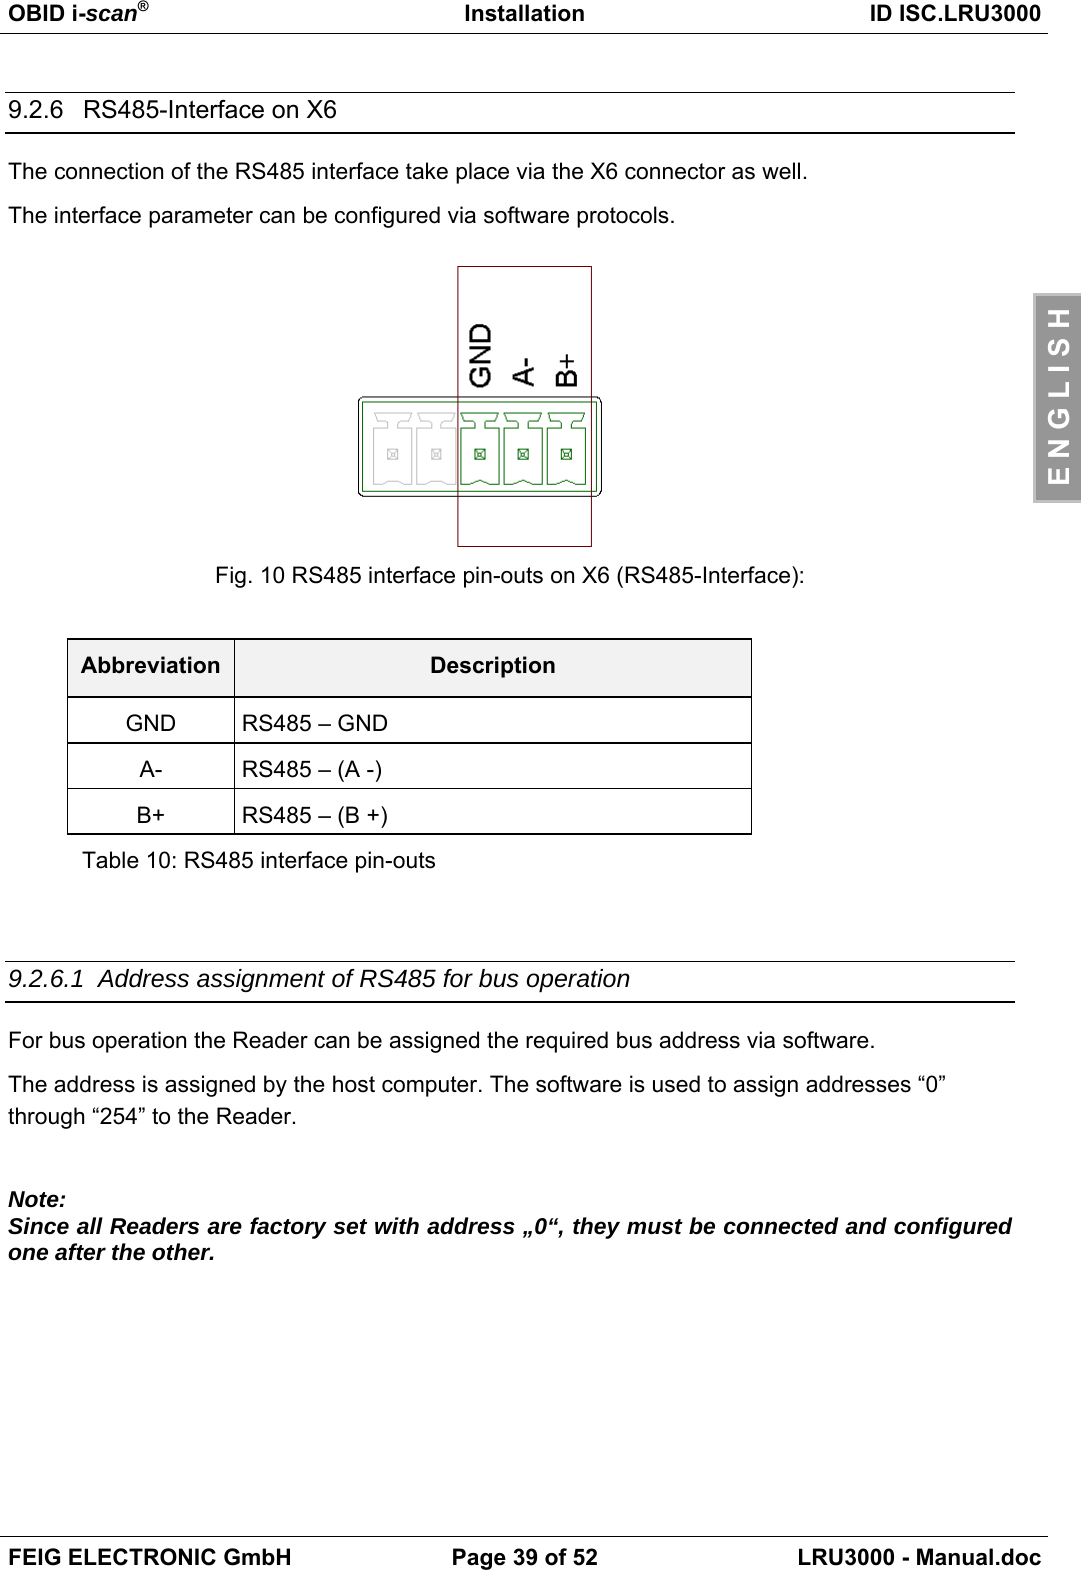 OBID i-scan®Installation ID ISC.LRU3000FEIG ELECTRONIC GmbH Page 39 of 52 LRU3000 - Manual.docE N G L I S H9.2.6  RS485-Interface on X6The connection of the RS485 interface take place via the X6 connector as well.The interface parameter can be configured via software protocols.Fig. 10 RS485 interface pin-outs on X6 (RS485-Interface):Abbreviation DescriptionGND RS485 – GNDA- RS485 – (A -)B+ RS485 – (B +)Table 10: RS485 interface pin-outs9.2.6.1 Address assignment of RS485 for bus operationFor bus operation the Reader can be assigned the required bus address via software.The address is assigned by the host computer. The software is used to assign addresses “0”through “254” to the Reader.Note:Since all Readers are factory set with address „0“, they must be connected and configuredone after the other.